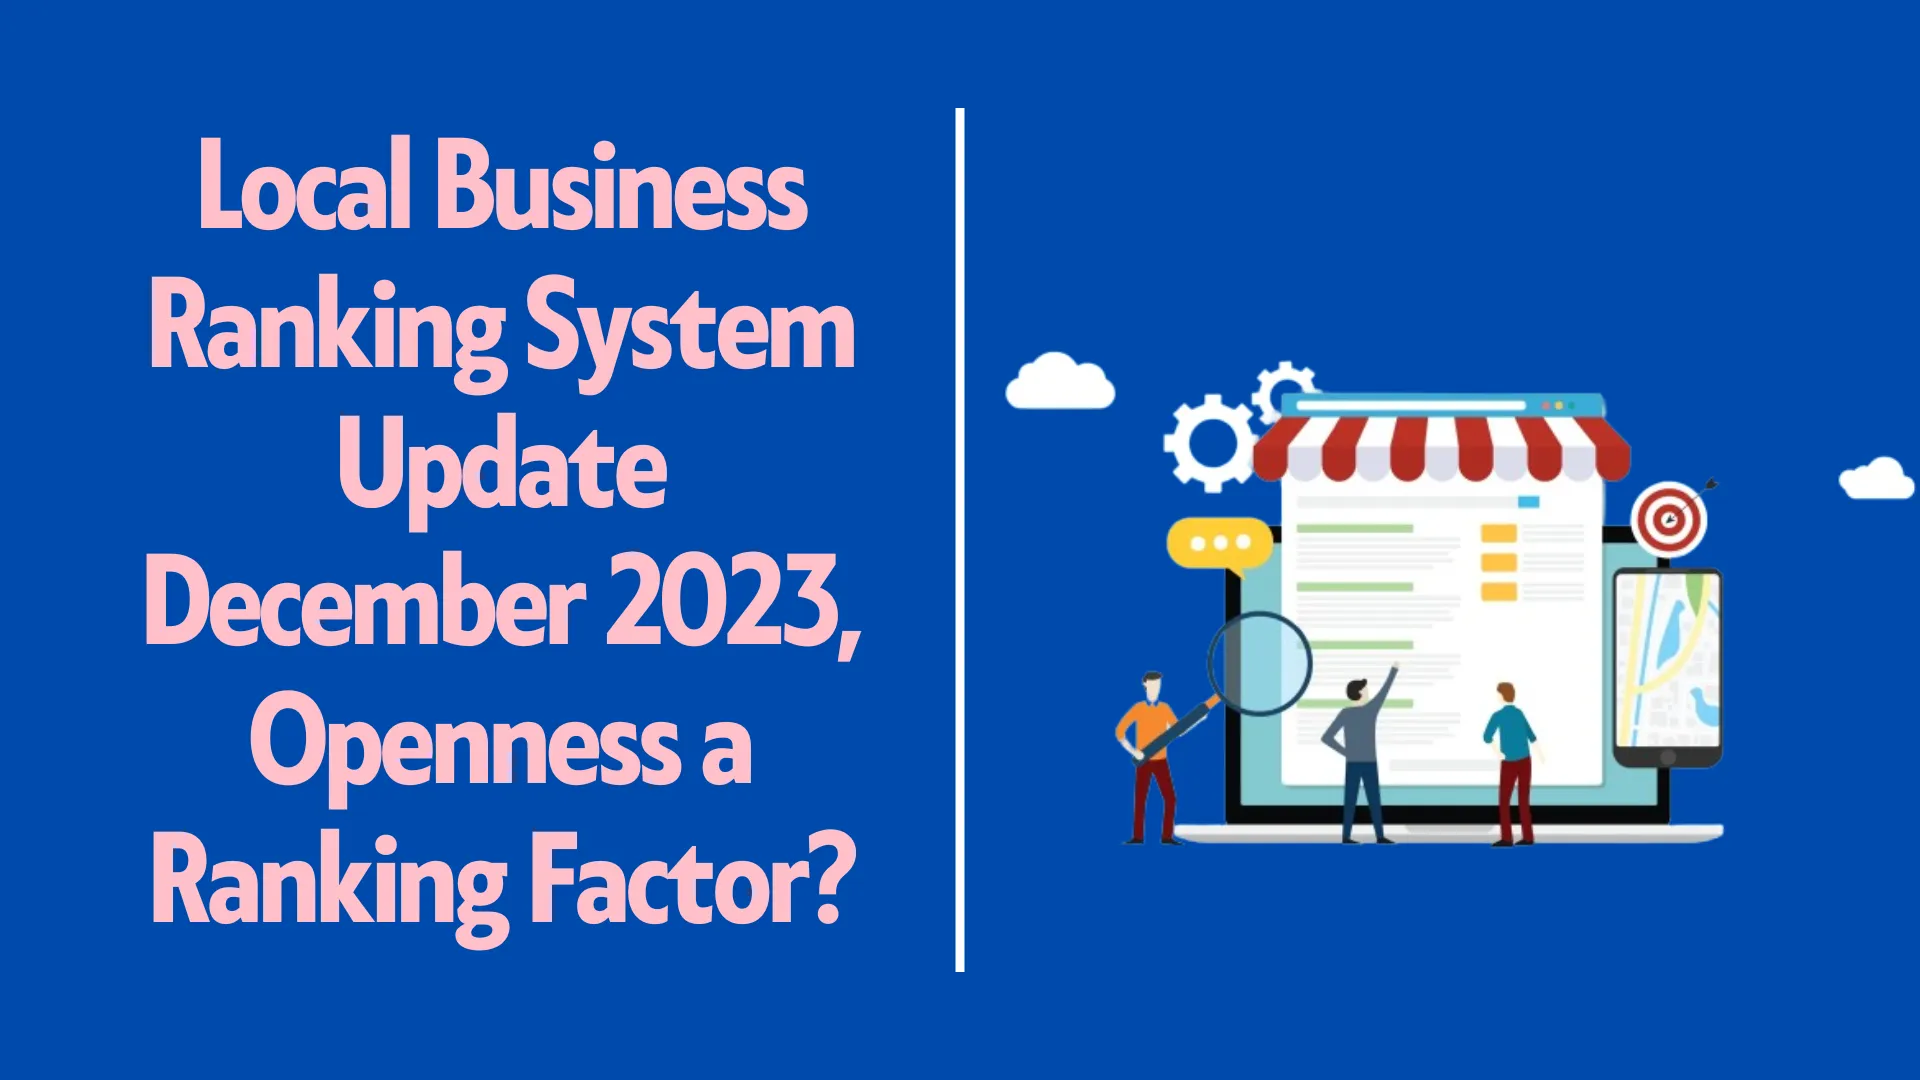 Local Business Ranking System Update December 2023, Openness a Ranking Factor